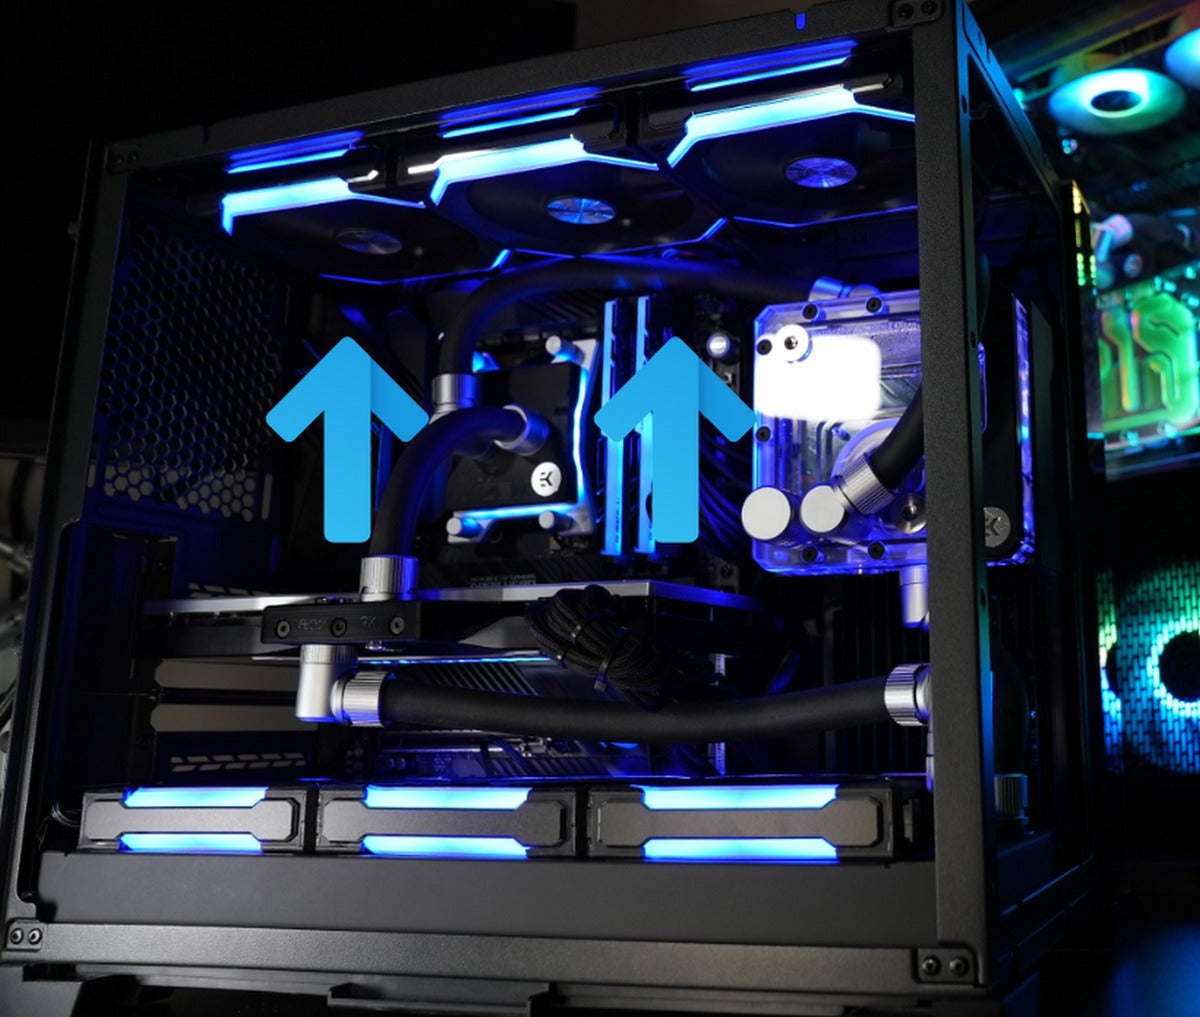 How to up PC's fans for maximum system cooling | PCWorld